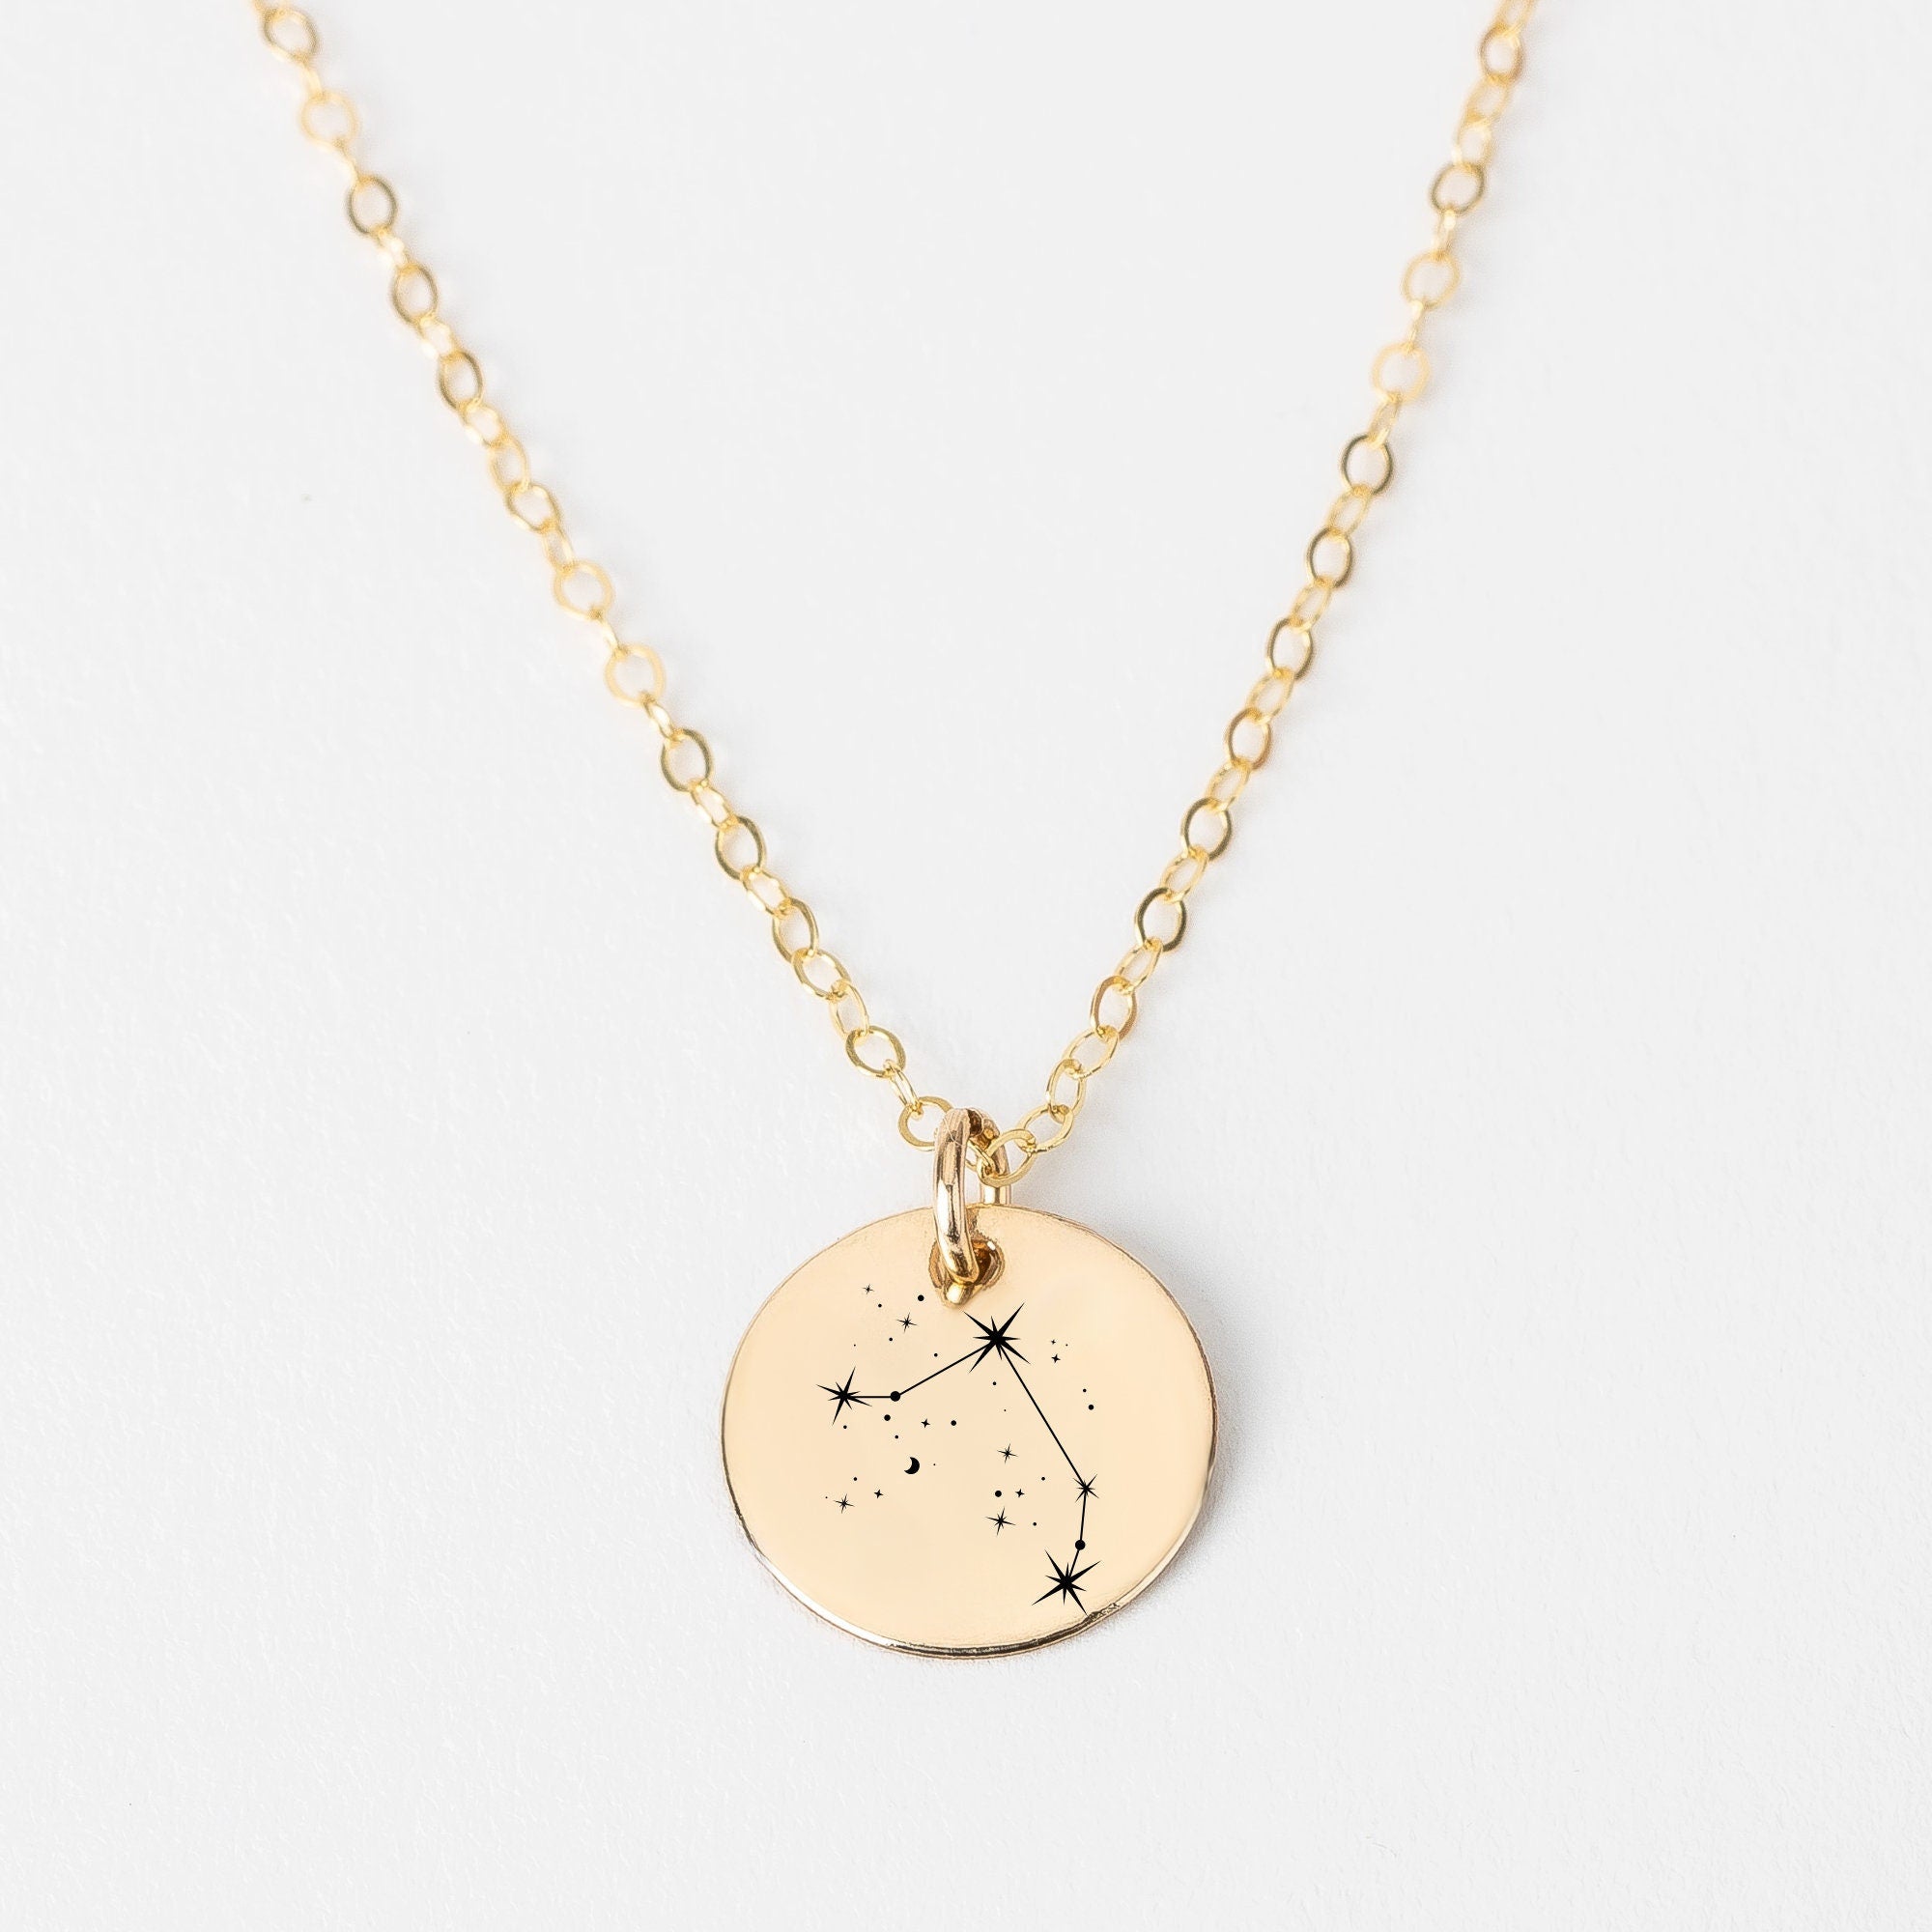 Constellation Disc Necklace - Melanie Golden Jewelry - _badge_new, birth month, bridal party, celestial, disc necklaces, love, mystic, necklaces, new, pendant necklace, personalized, wedding